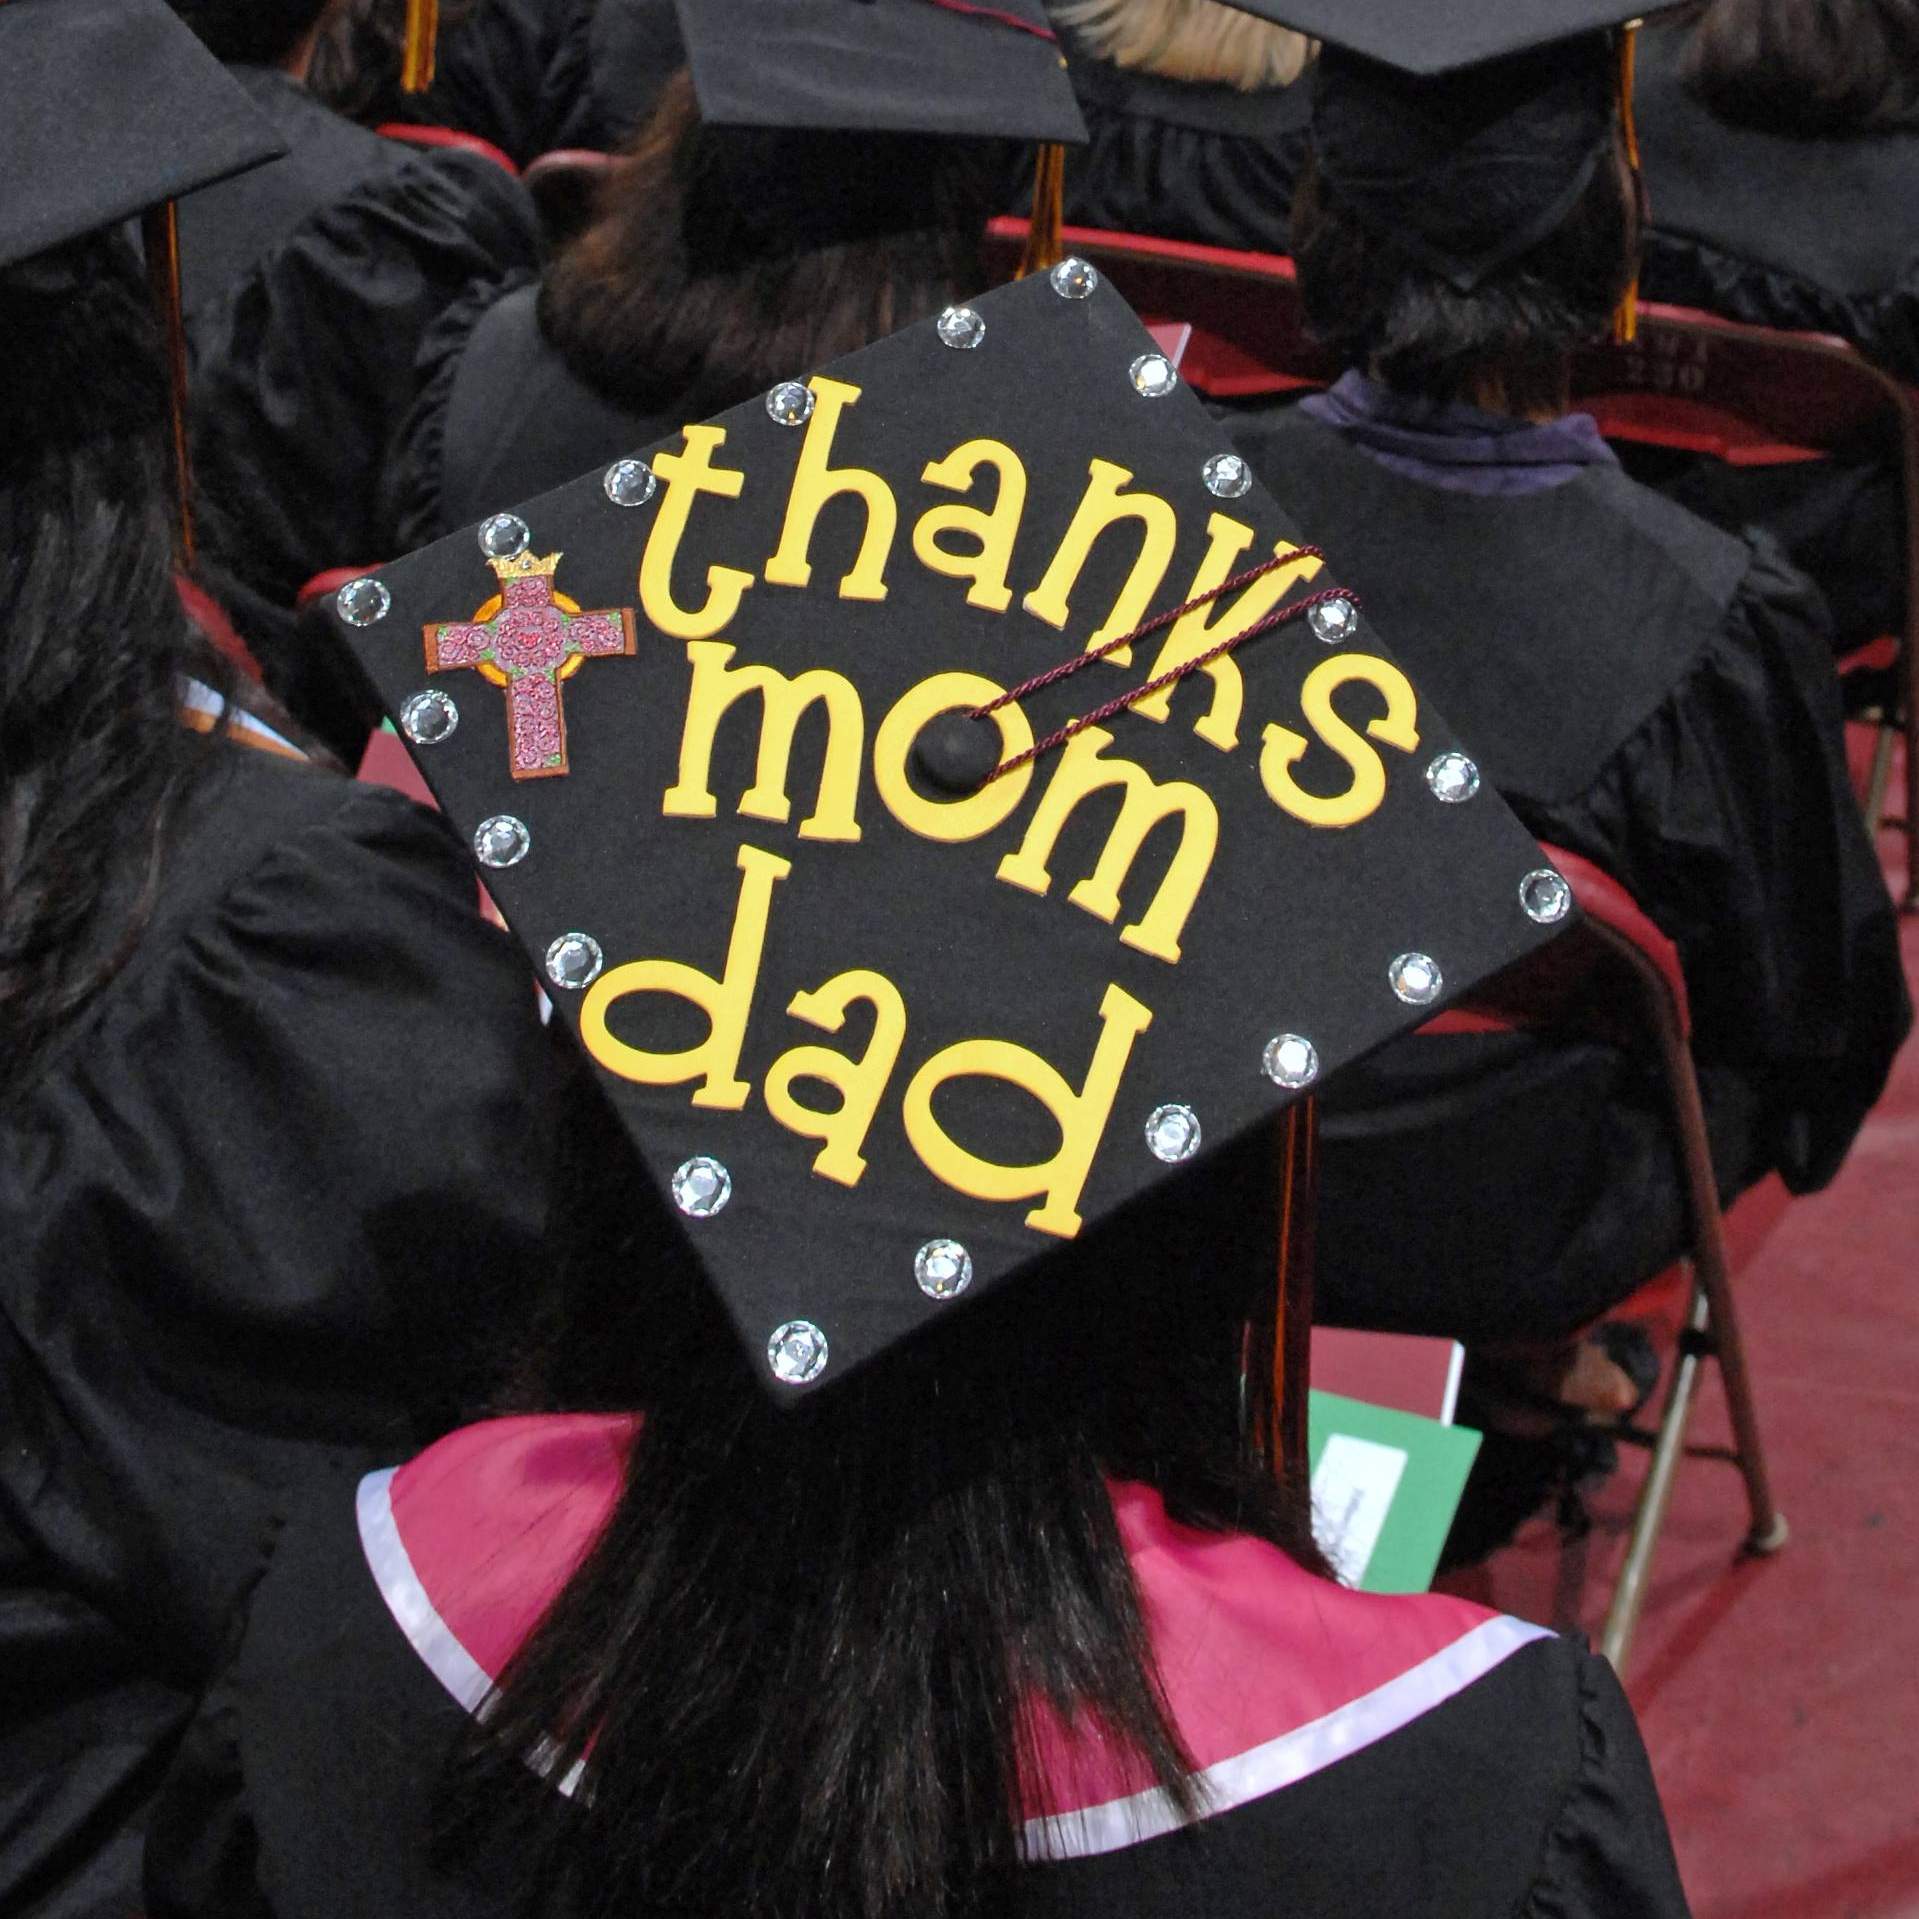 cap with "thanks mom dad"